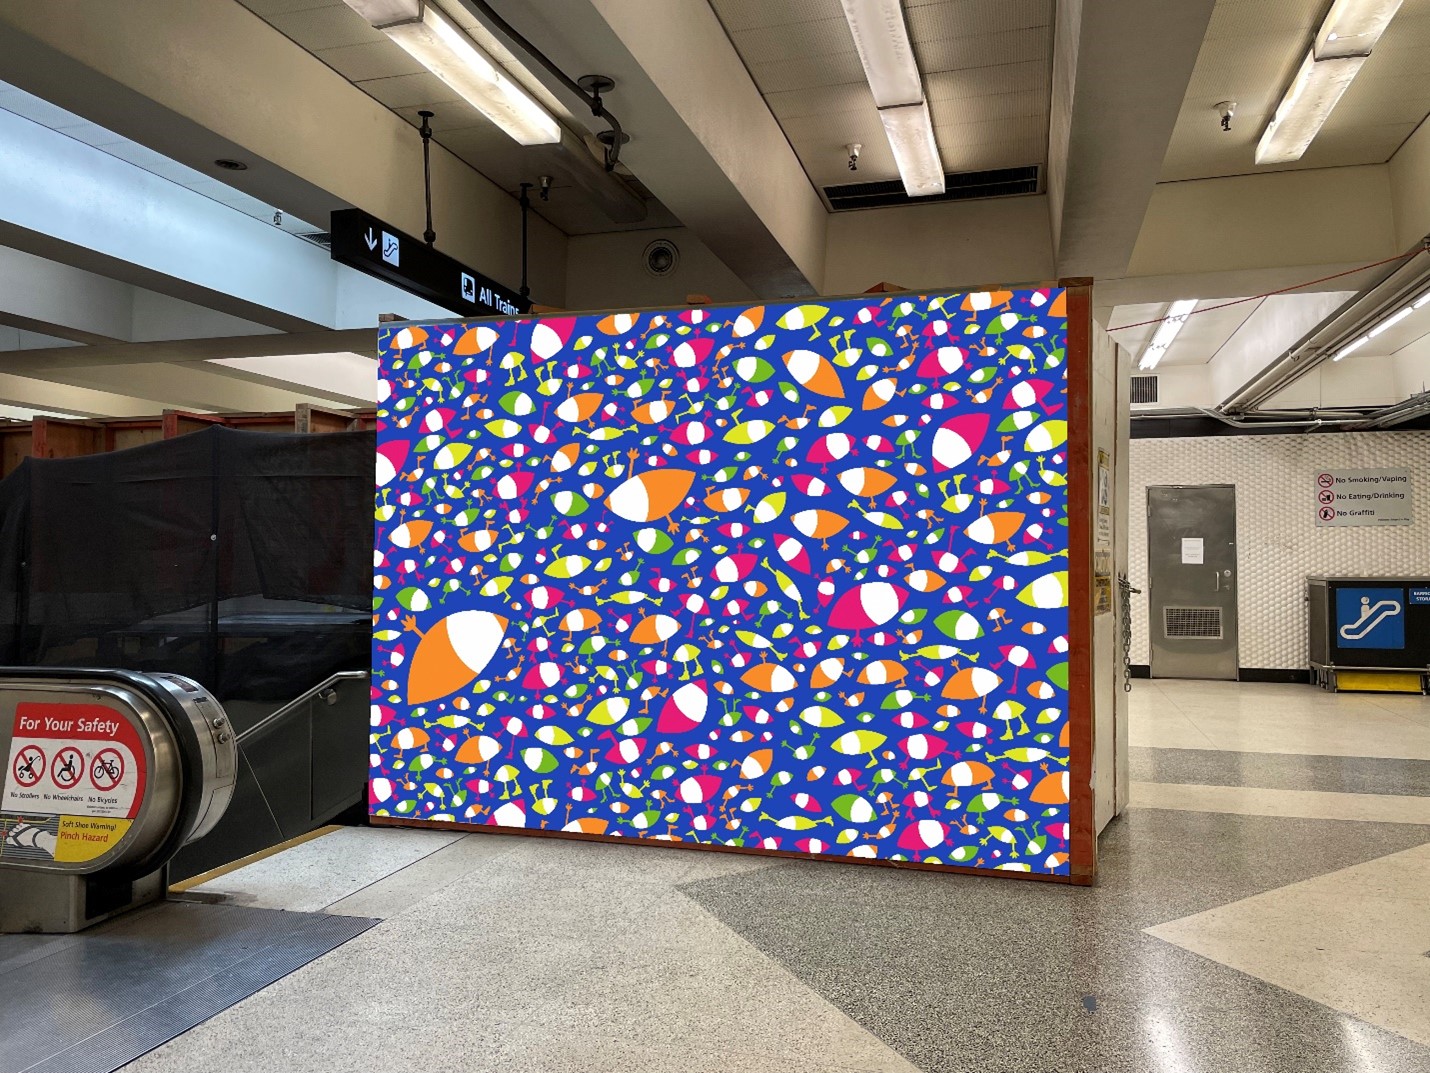 Local art students invigorate Market Street BART stations with colorful designs